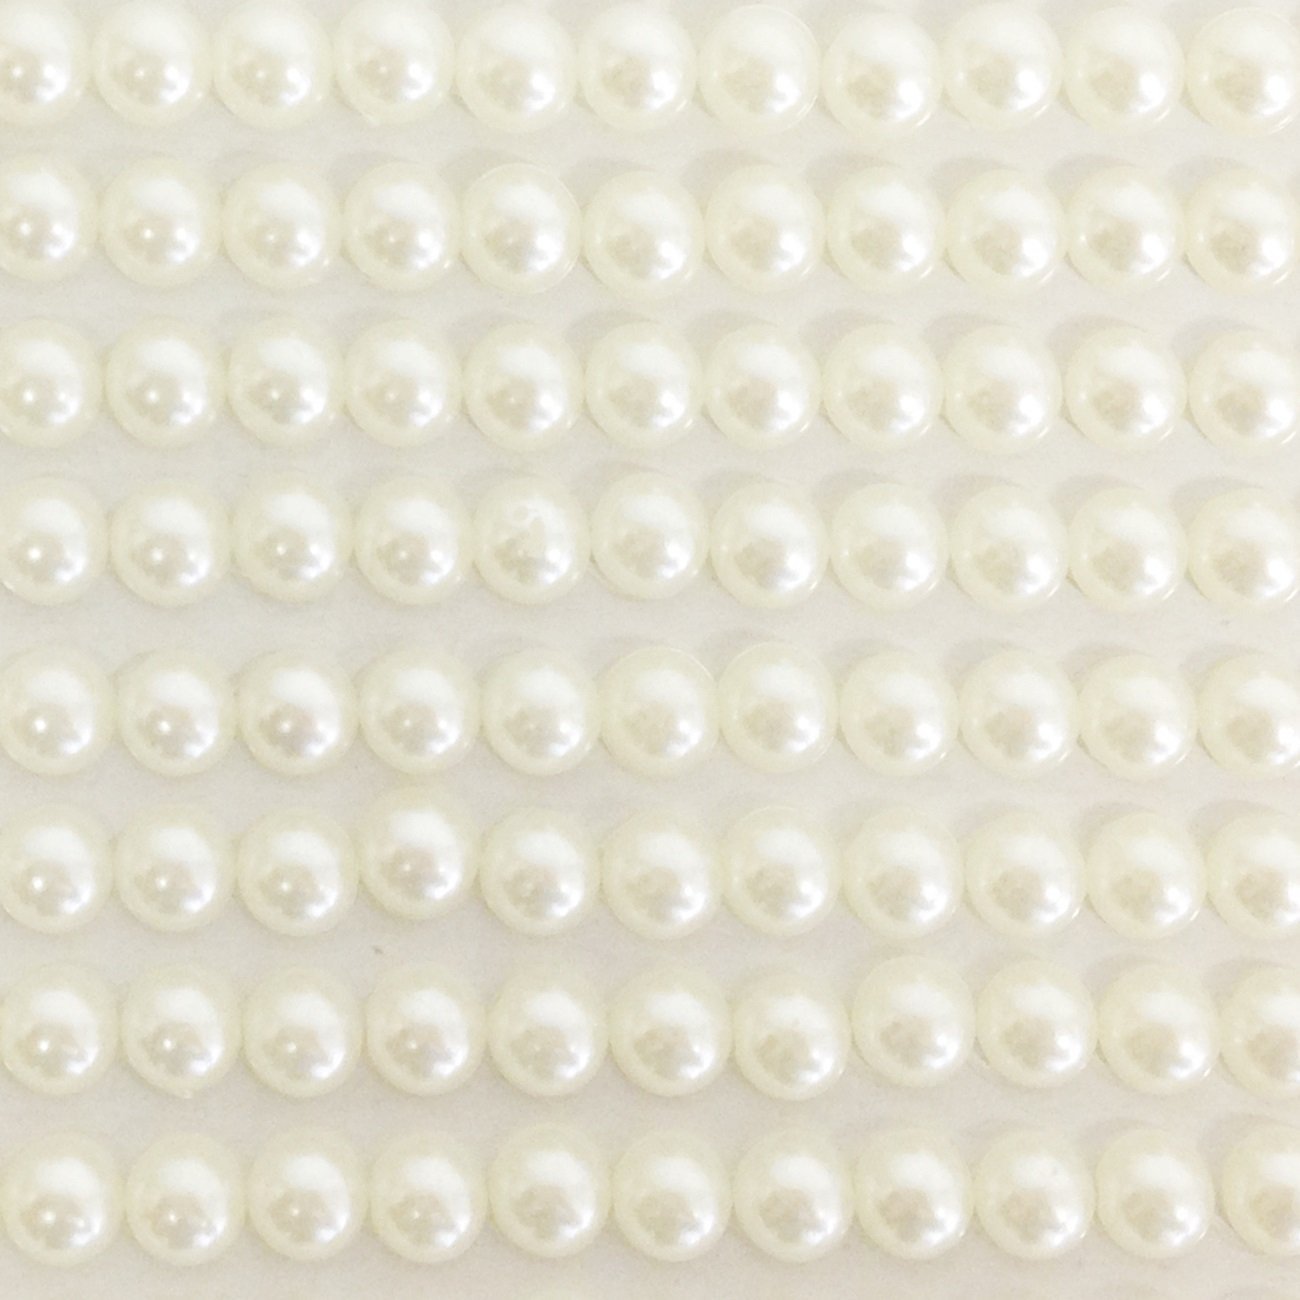 Wrapables 5mm Self Adhesive Pearl Stickers, 765pcs